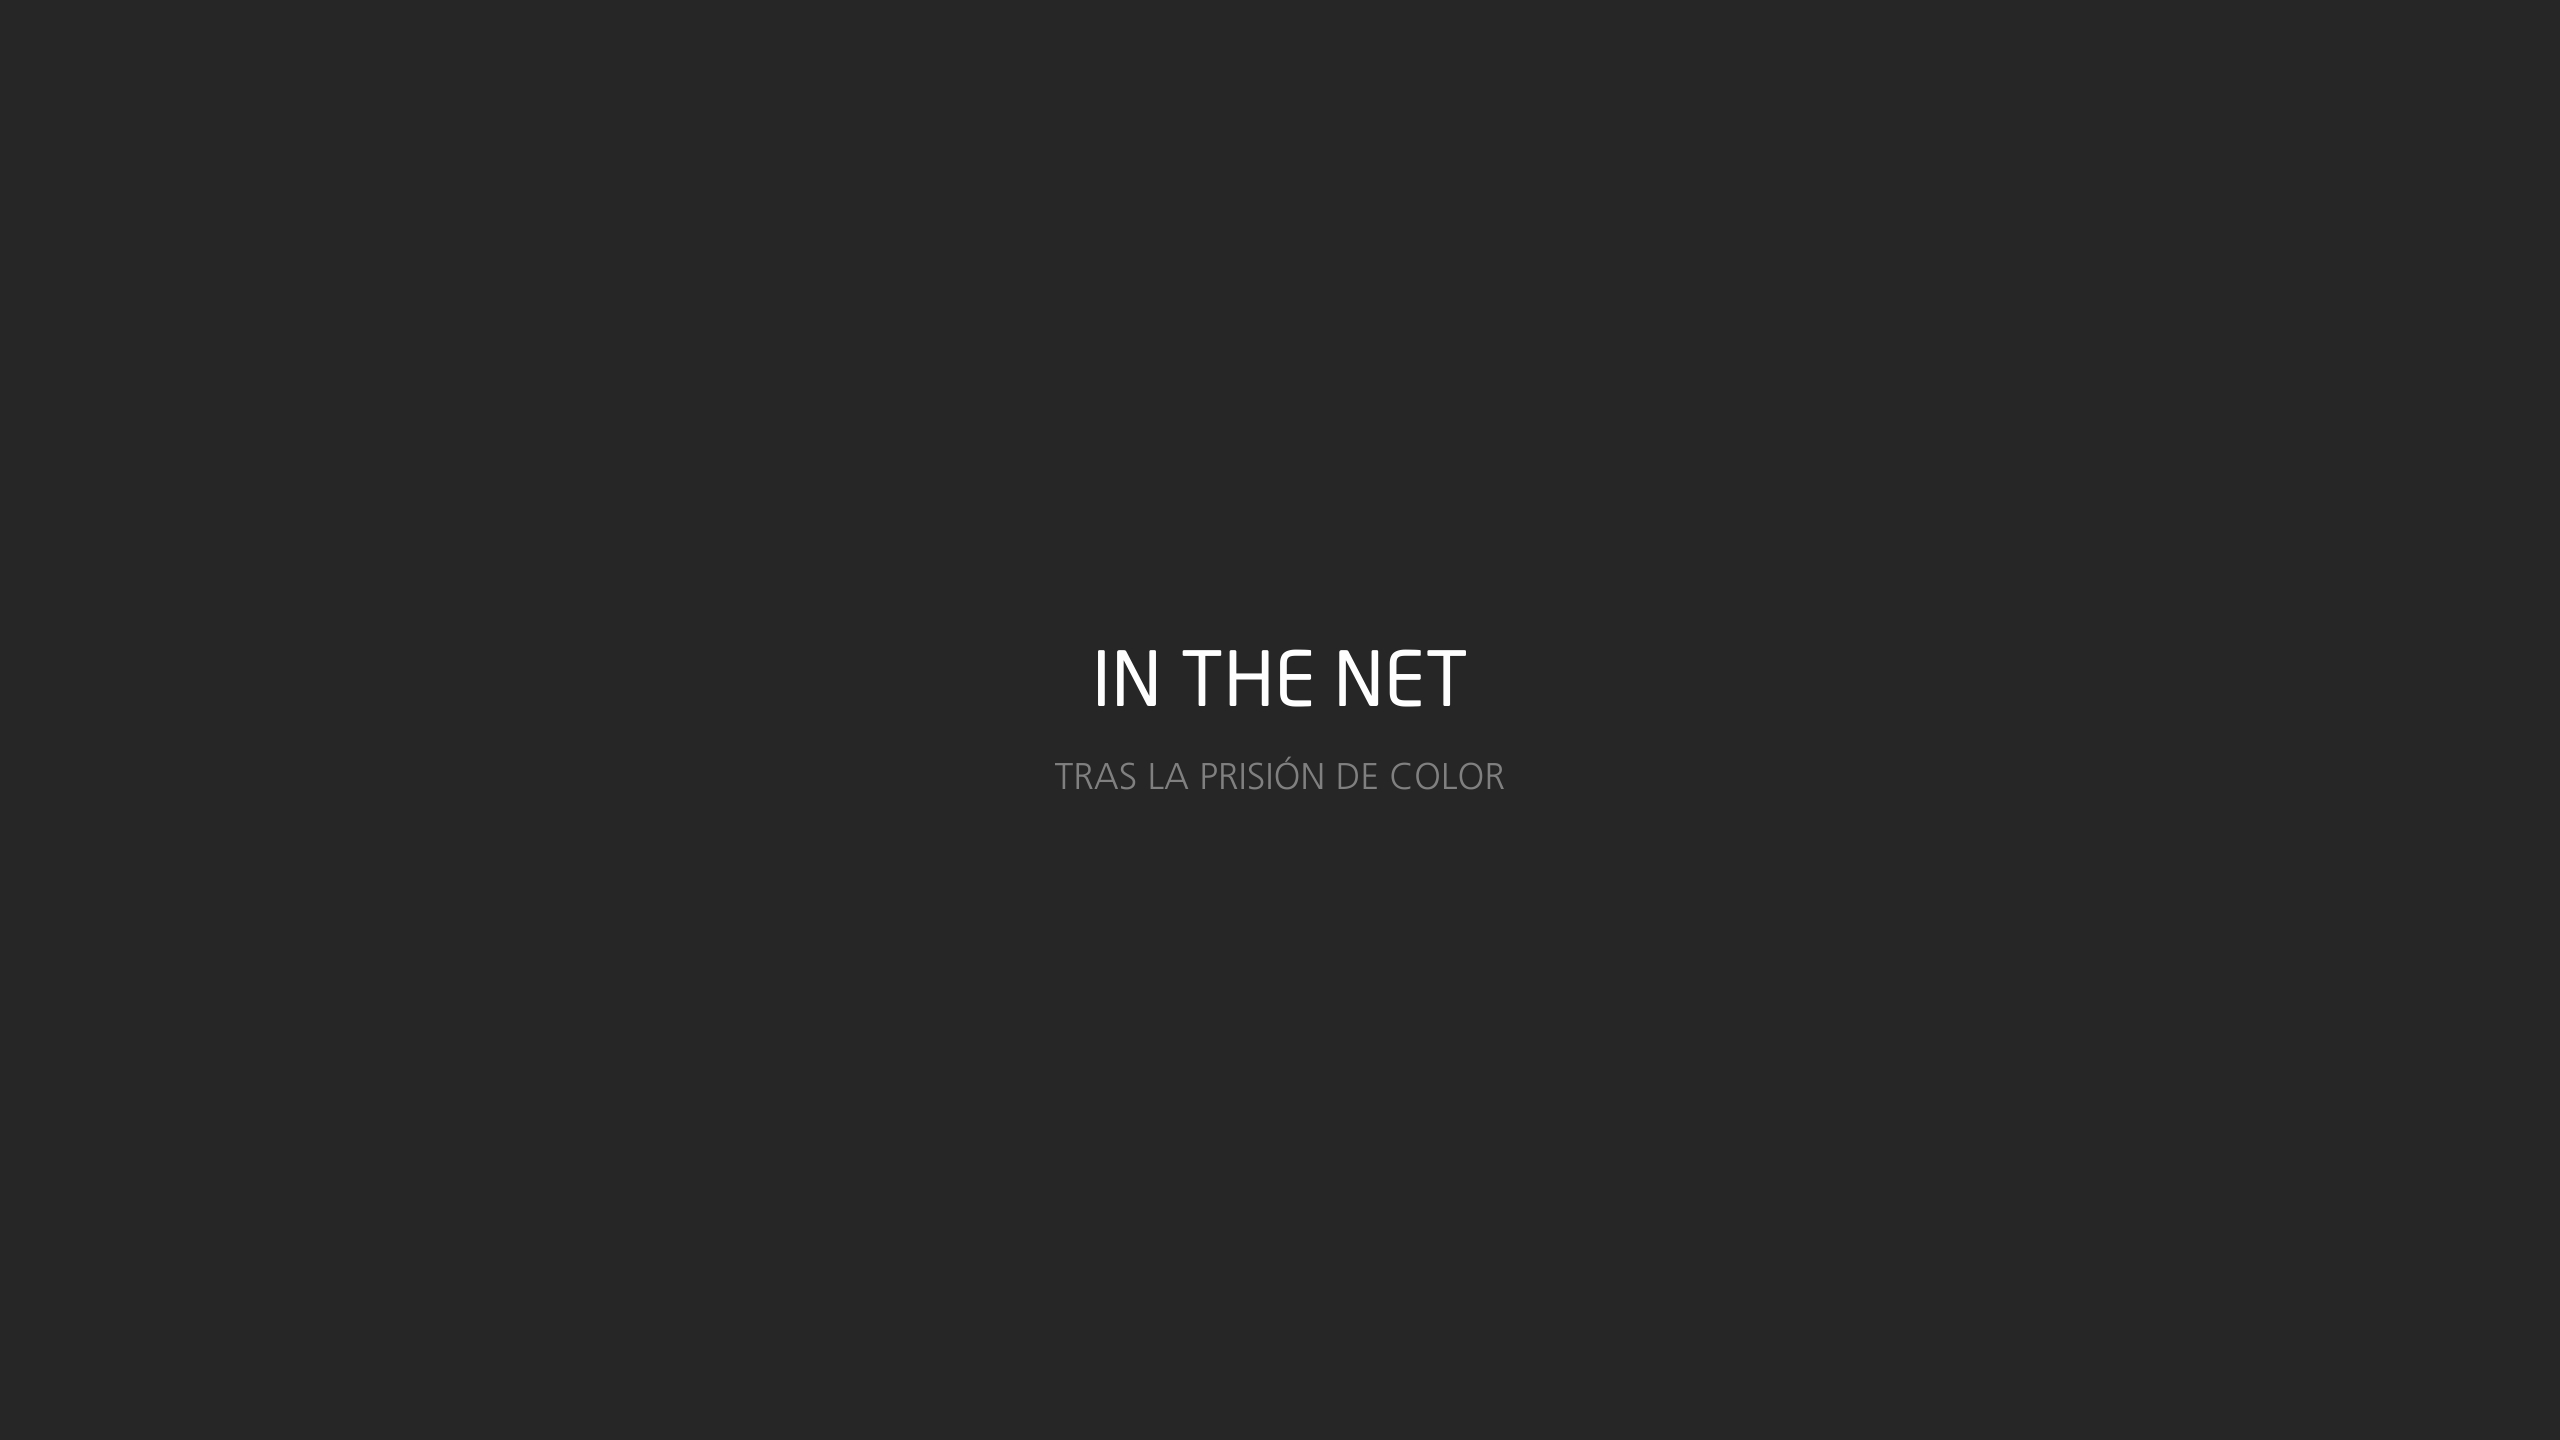 Personal In the net